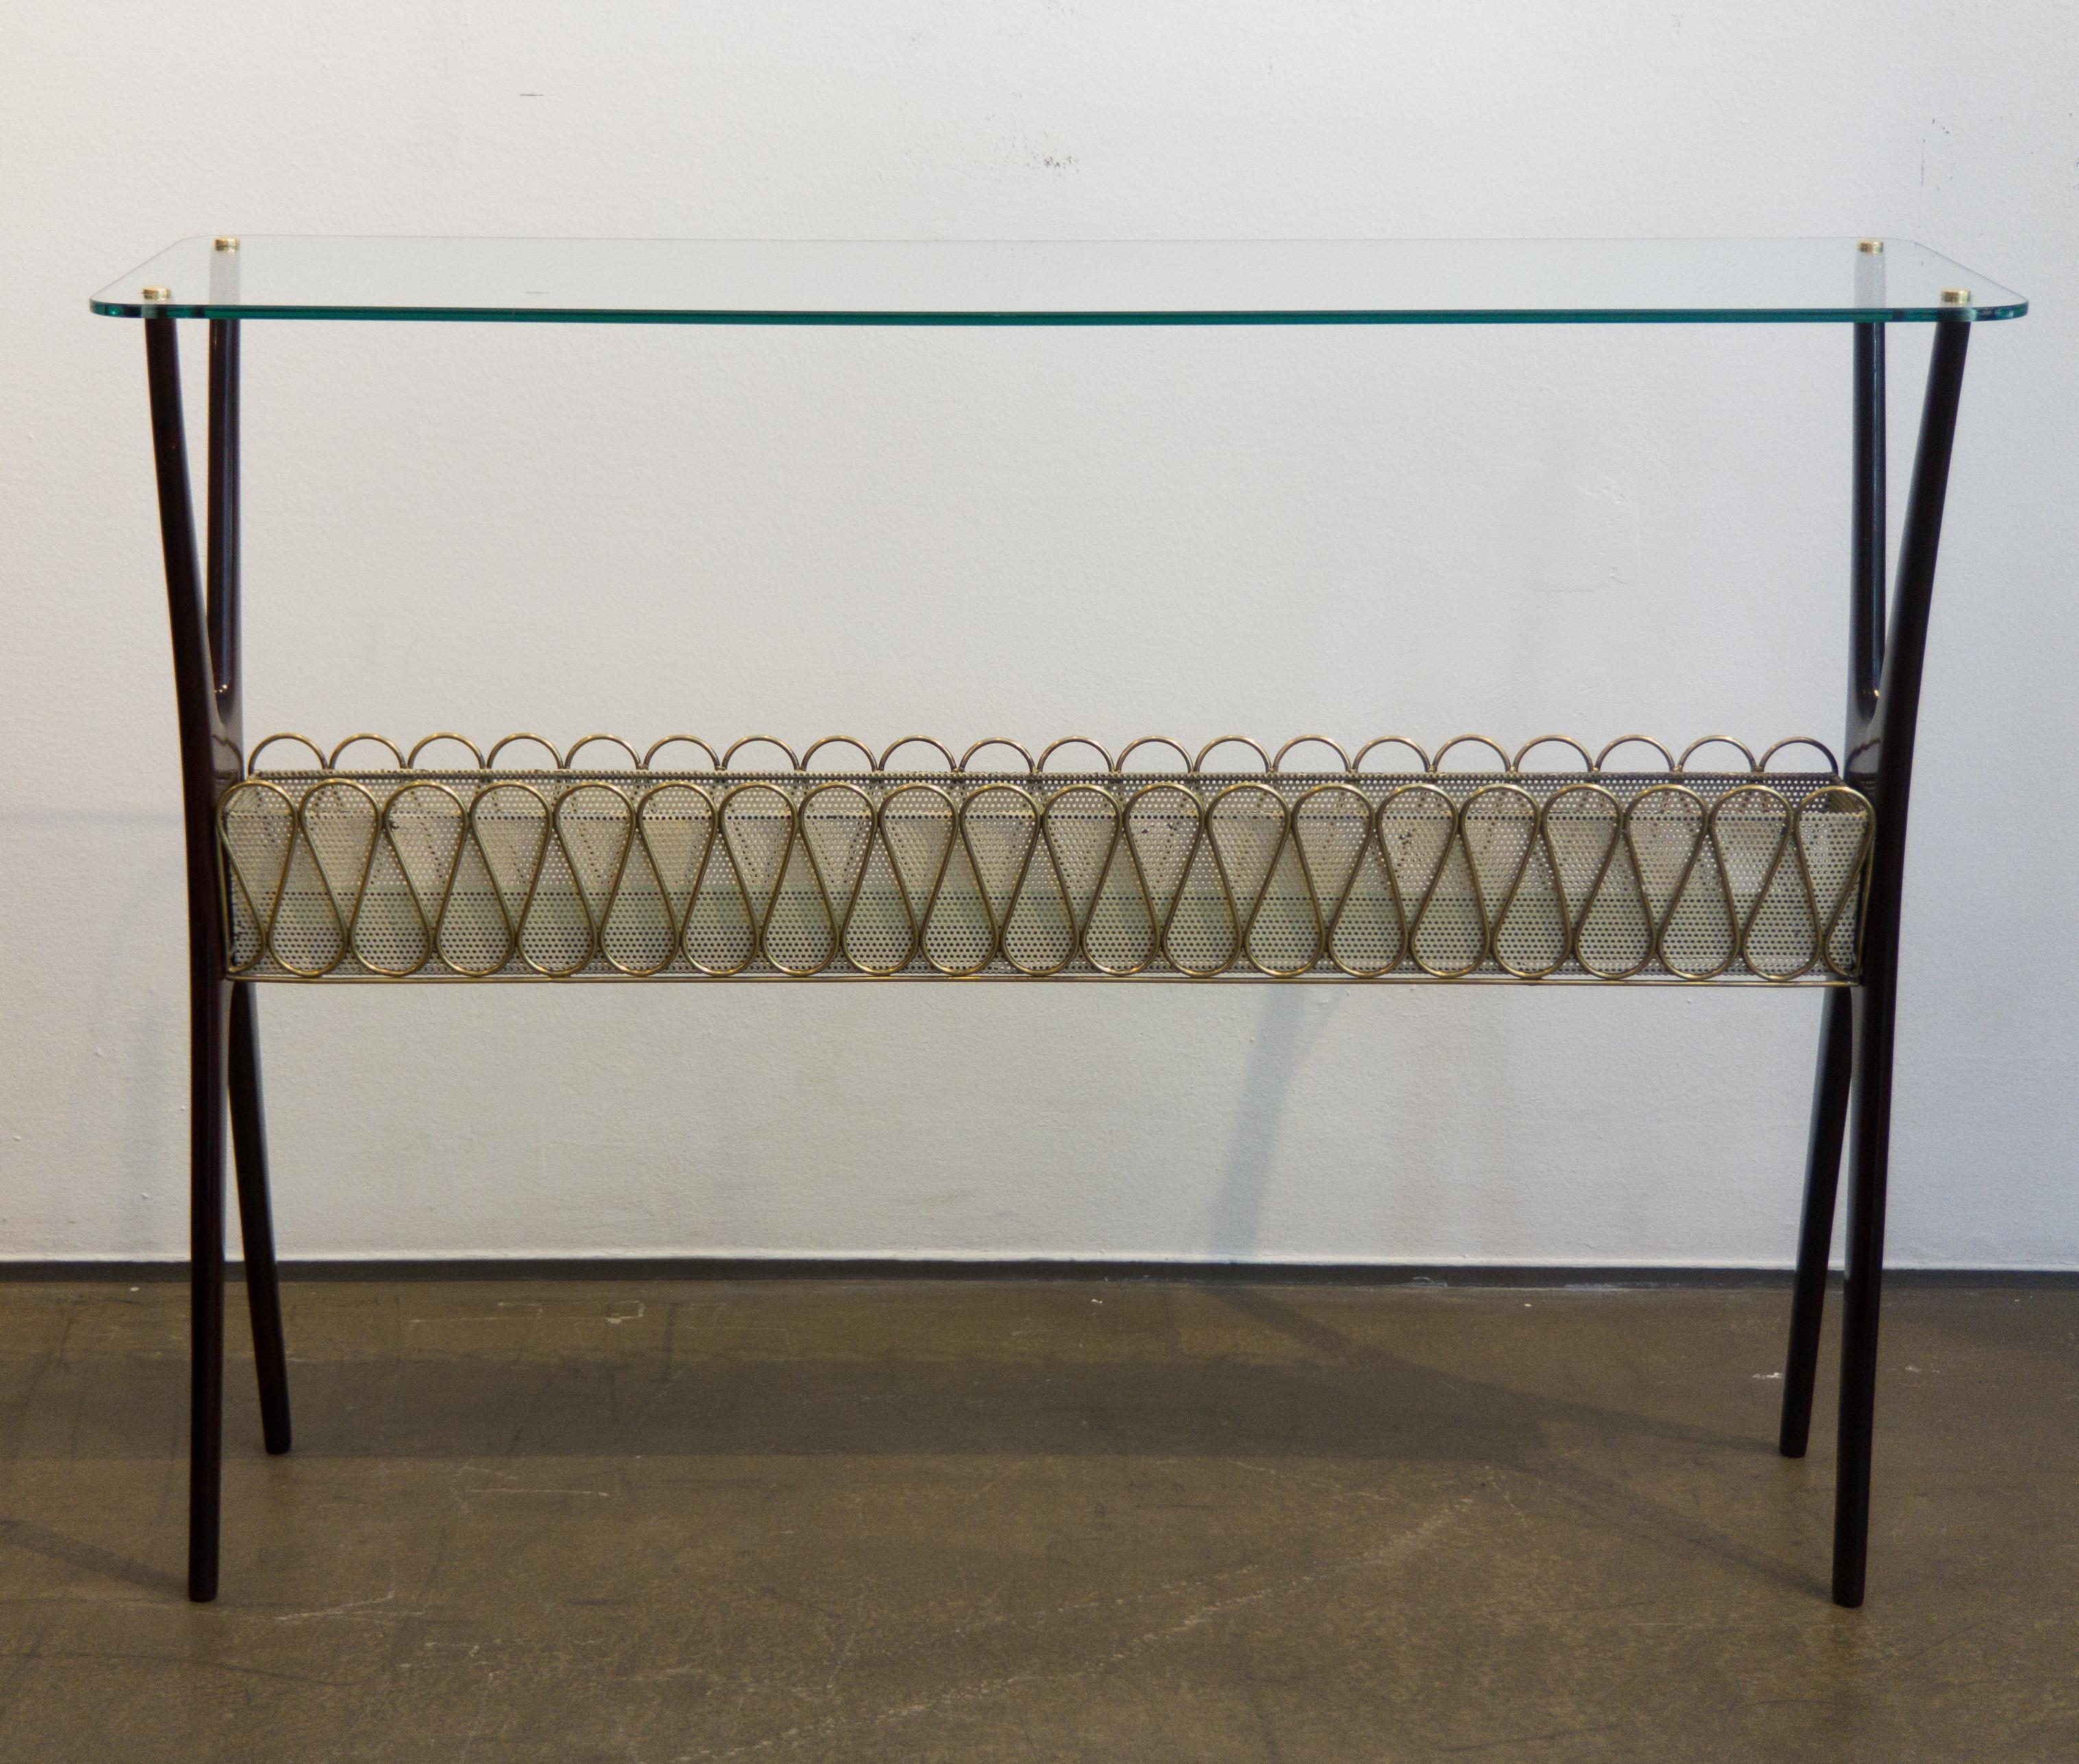 Very elegant Mid-Century console table from Italy designed by Cesare Lacca around the 1950s. The console table is made from rosewood and has a glass top which is fixed to the frame with four polished brass covers. The sideboard has two X-shaped